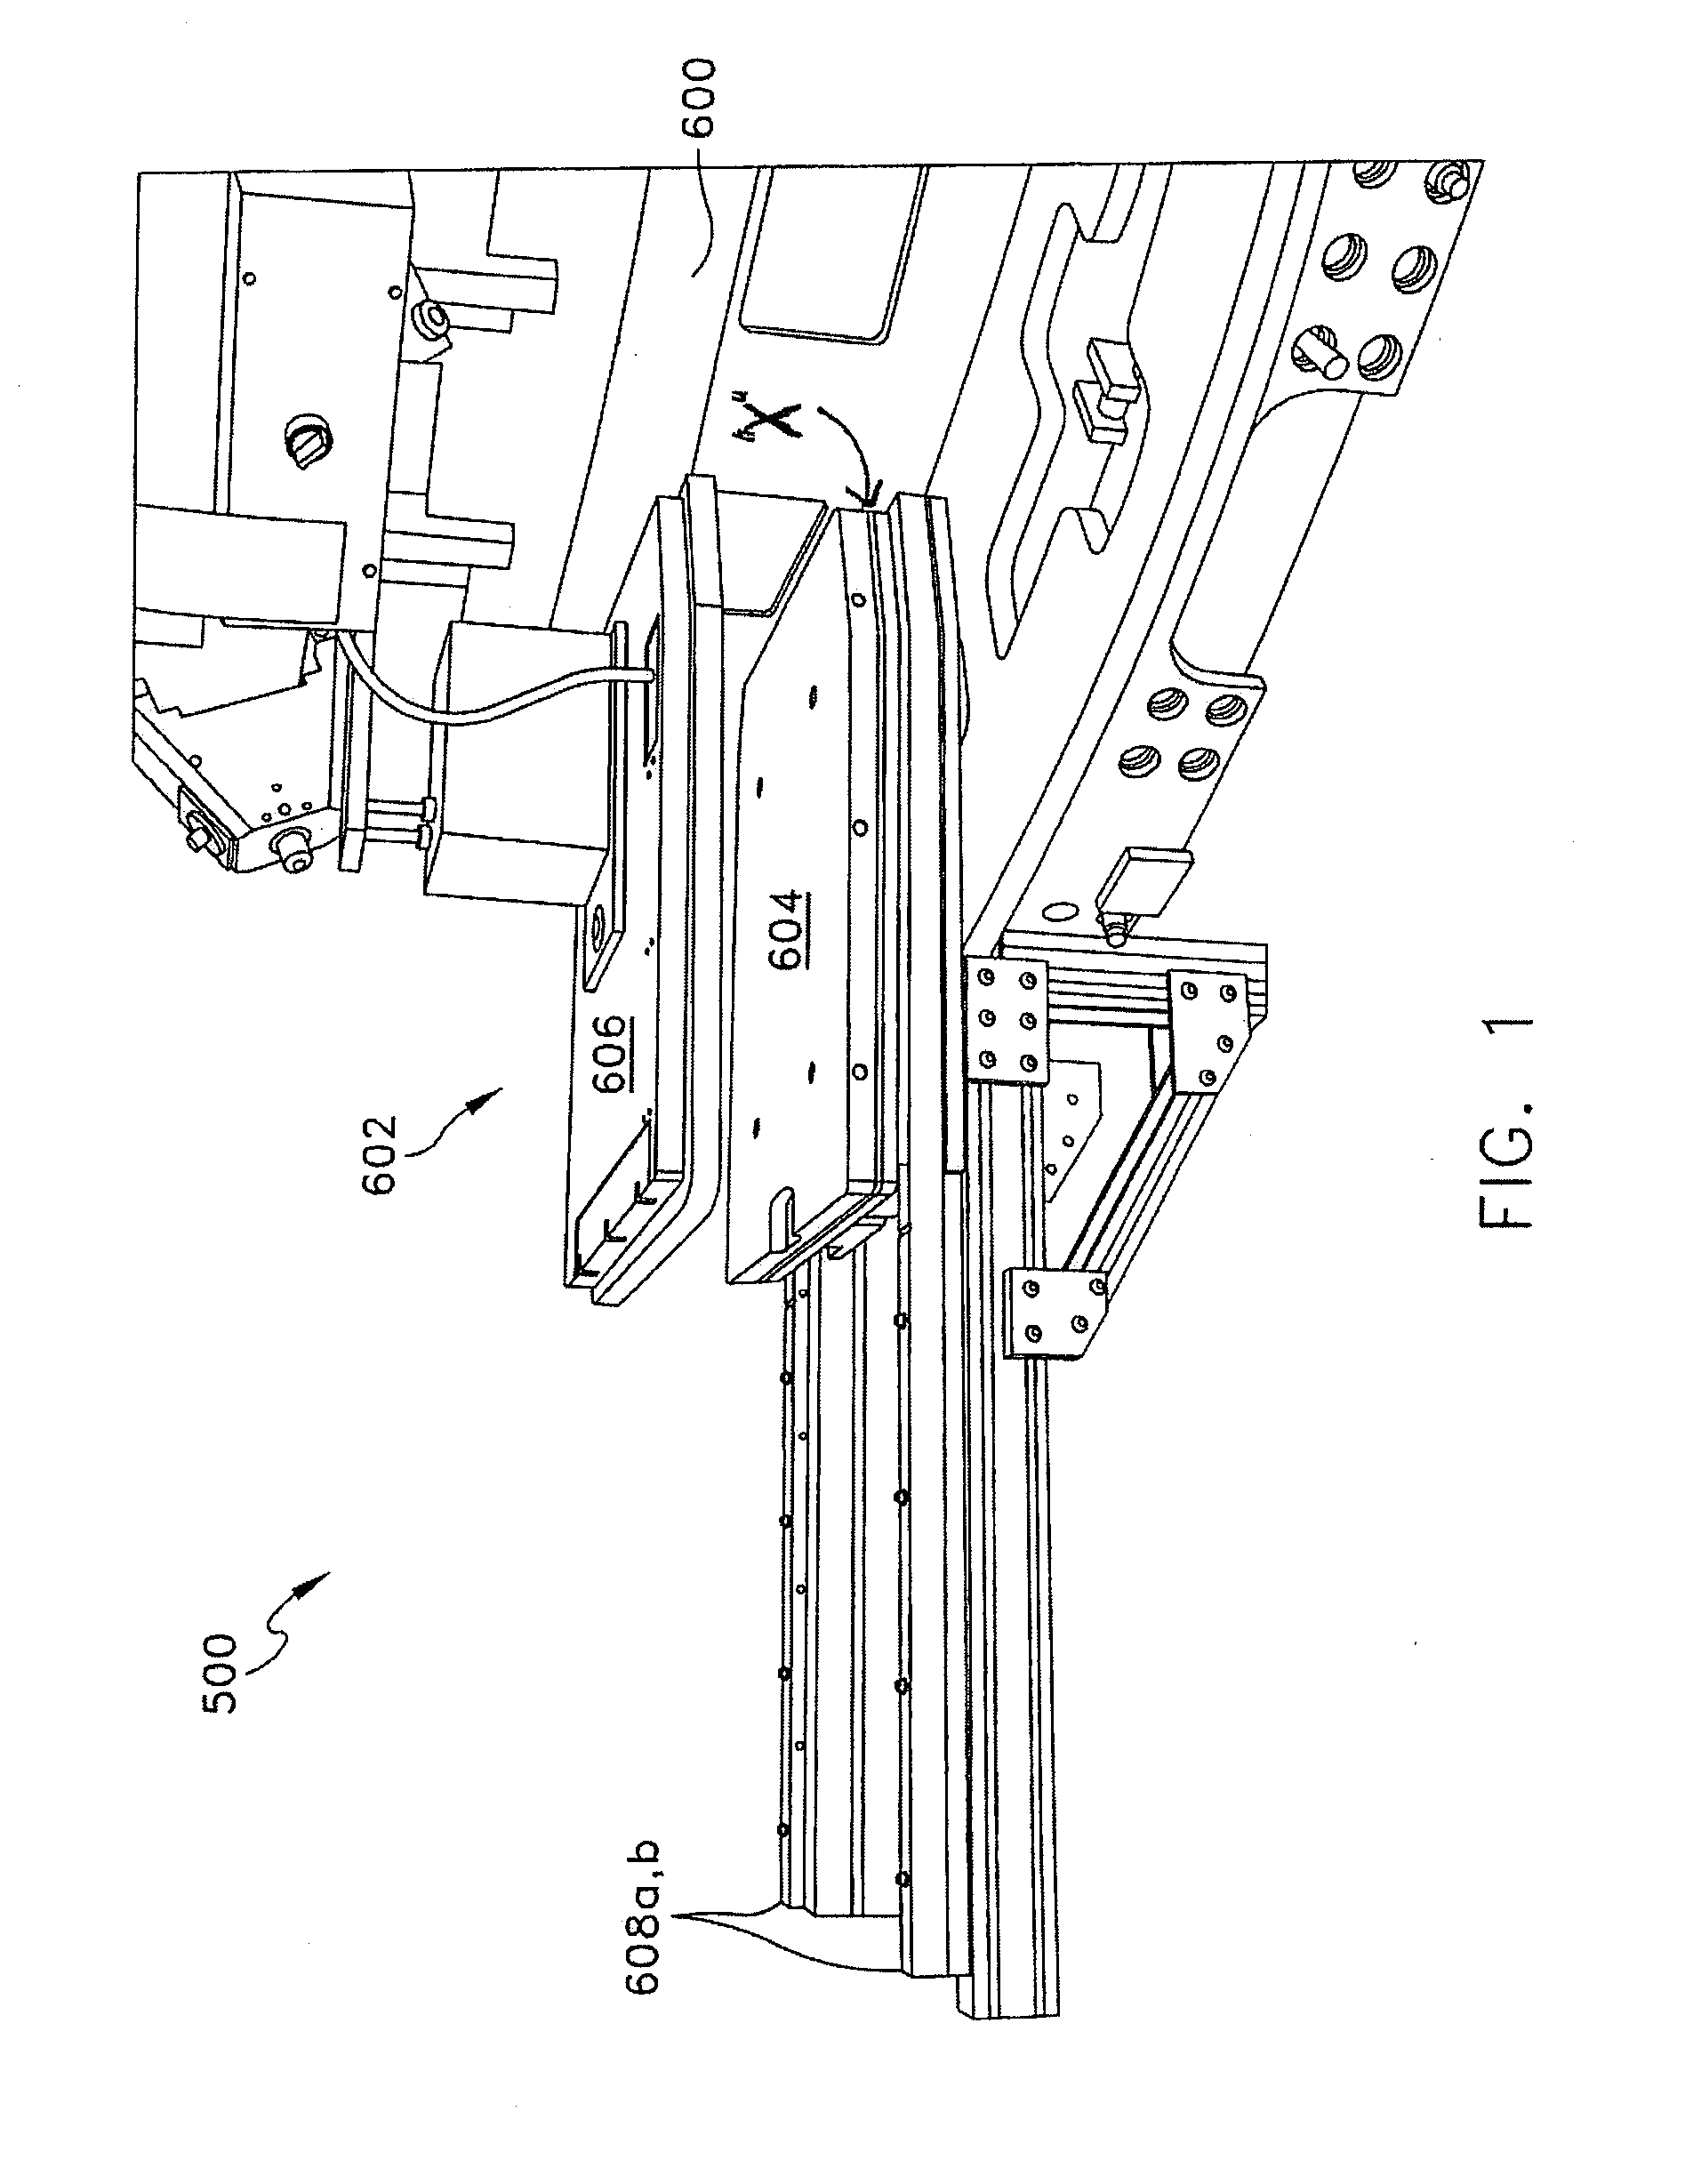 Molding system, method and articles formed thereby